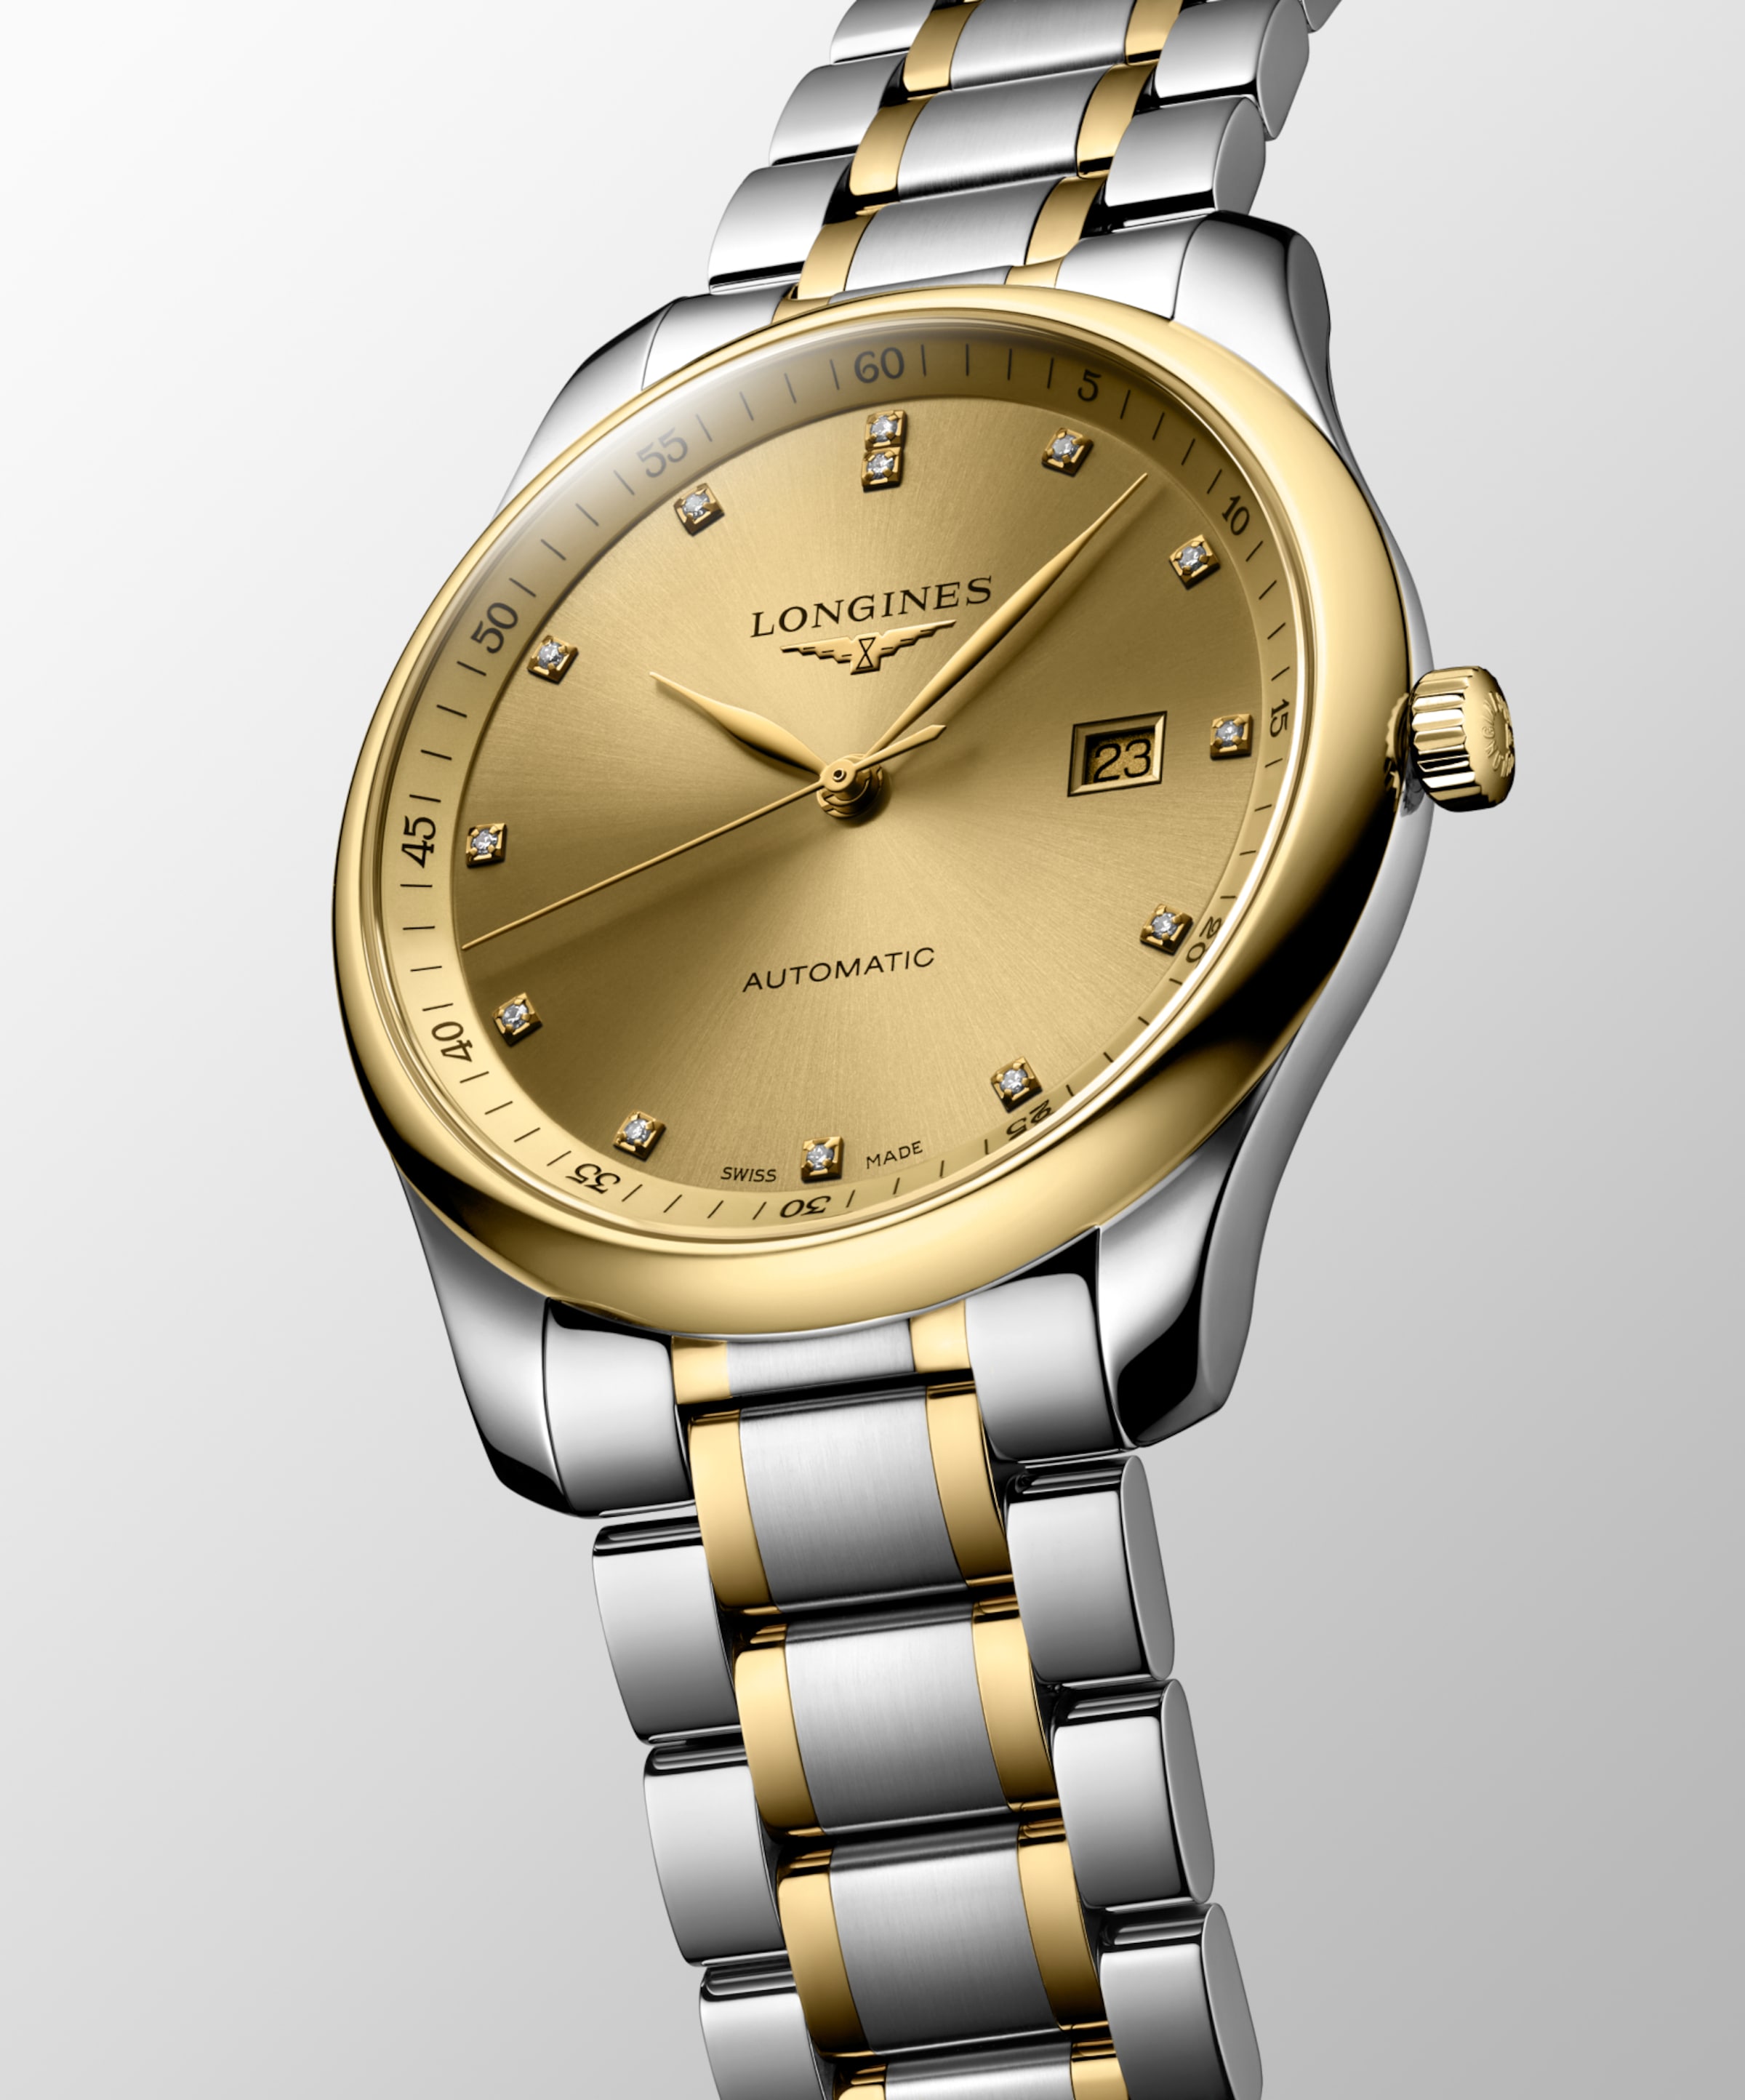 Longines MASTER COLLECTION Automatic Stainless steel and 18 karat yellow gold cap 200 Watch - L2.893.5.37.7